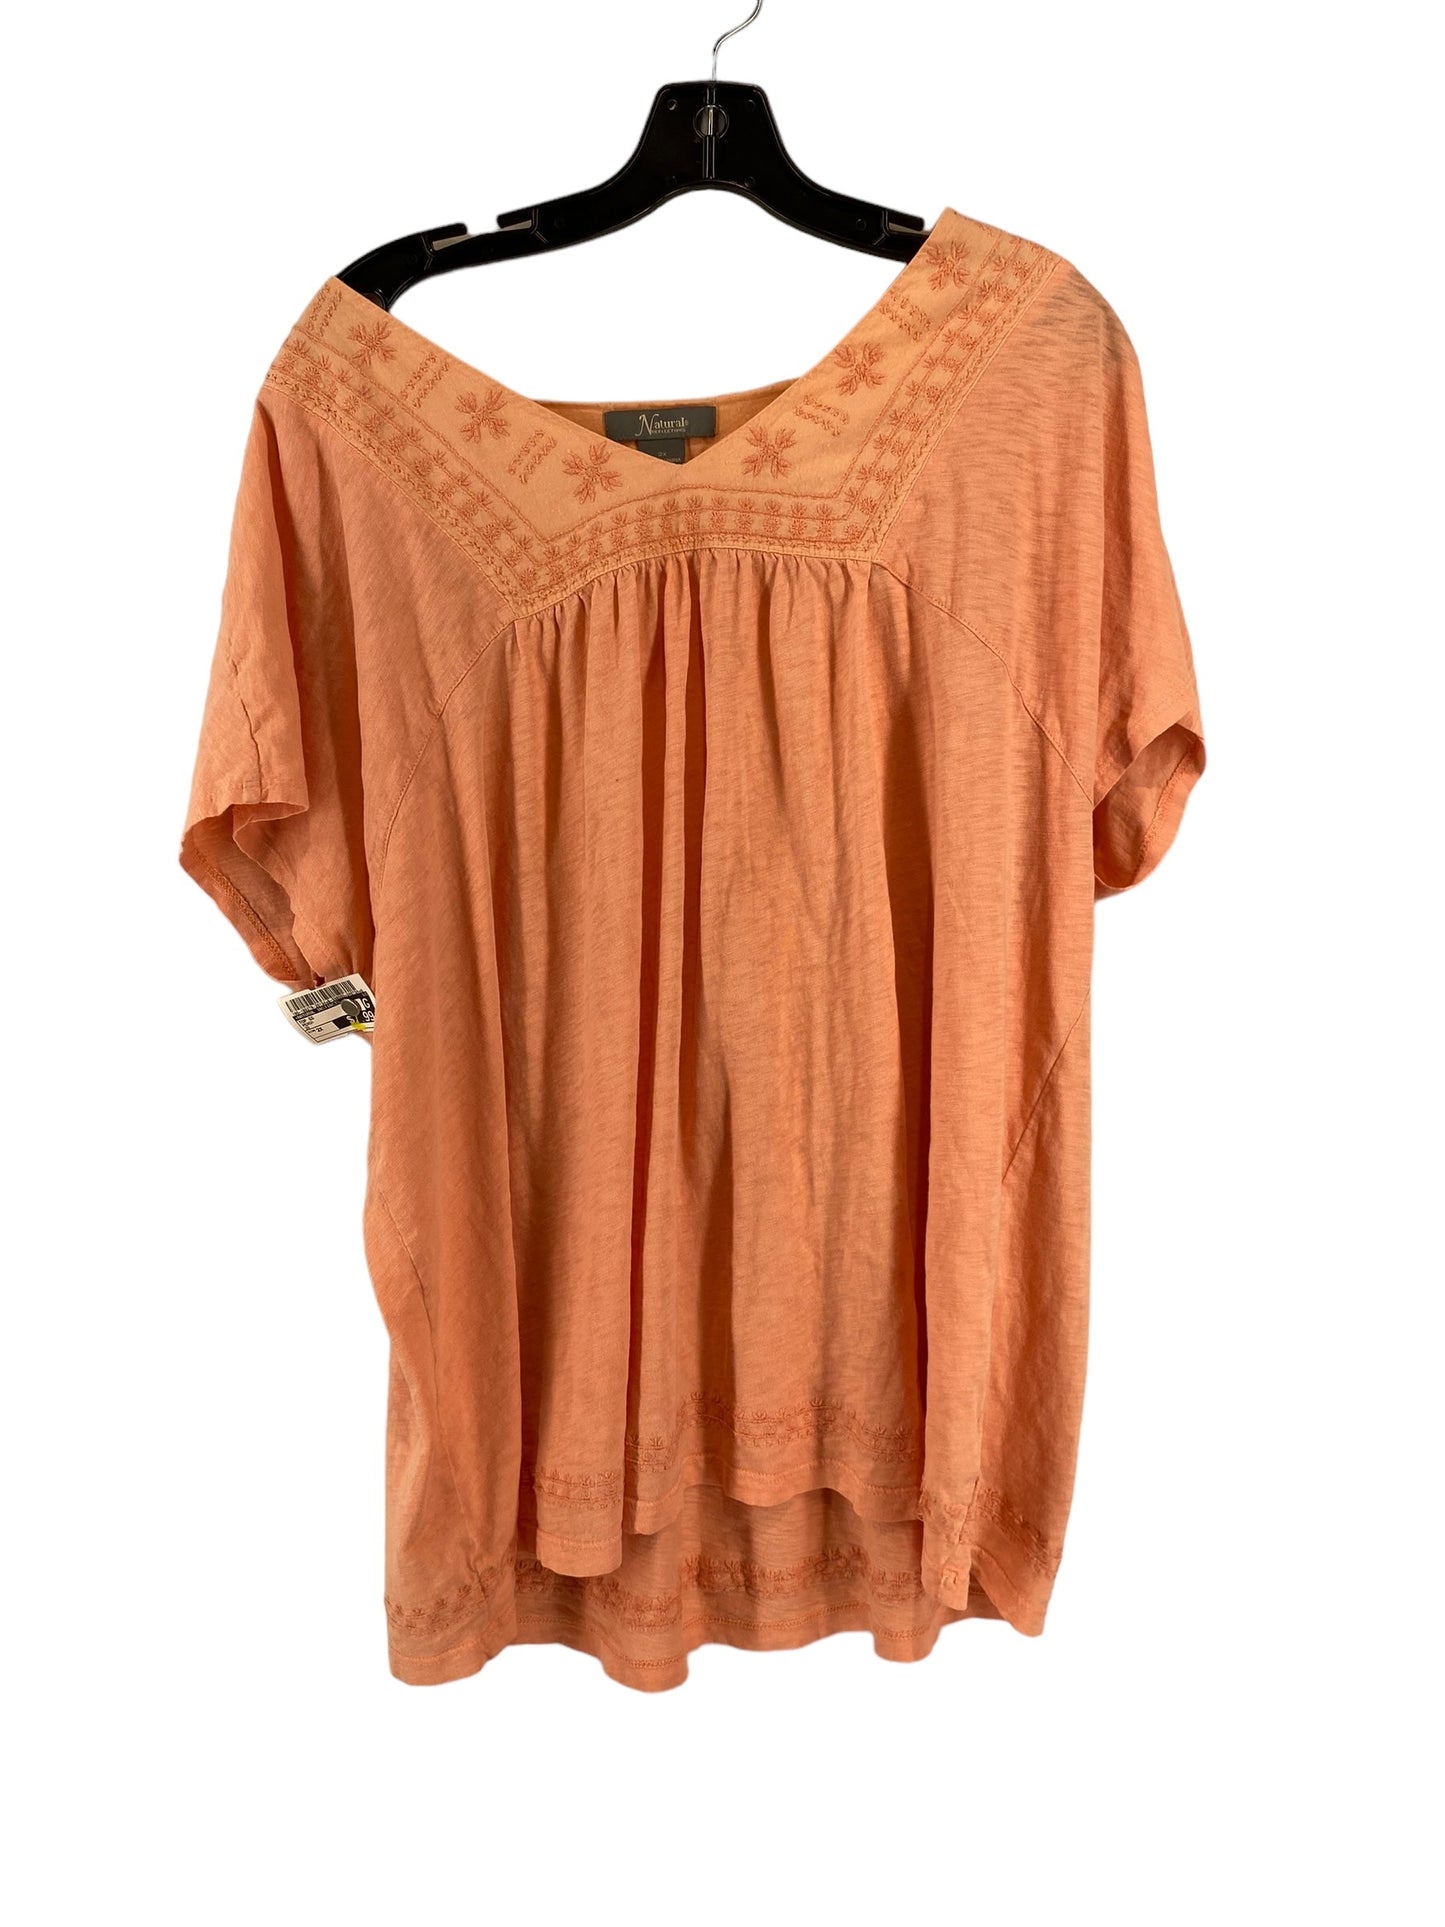 Peach Top Short Sleeve Natural Instincts, Size 2x